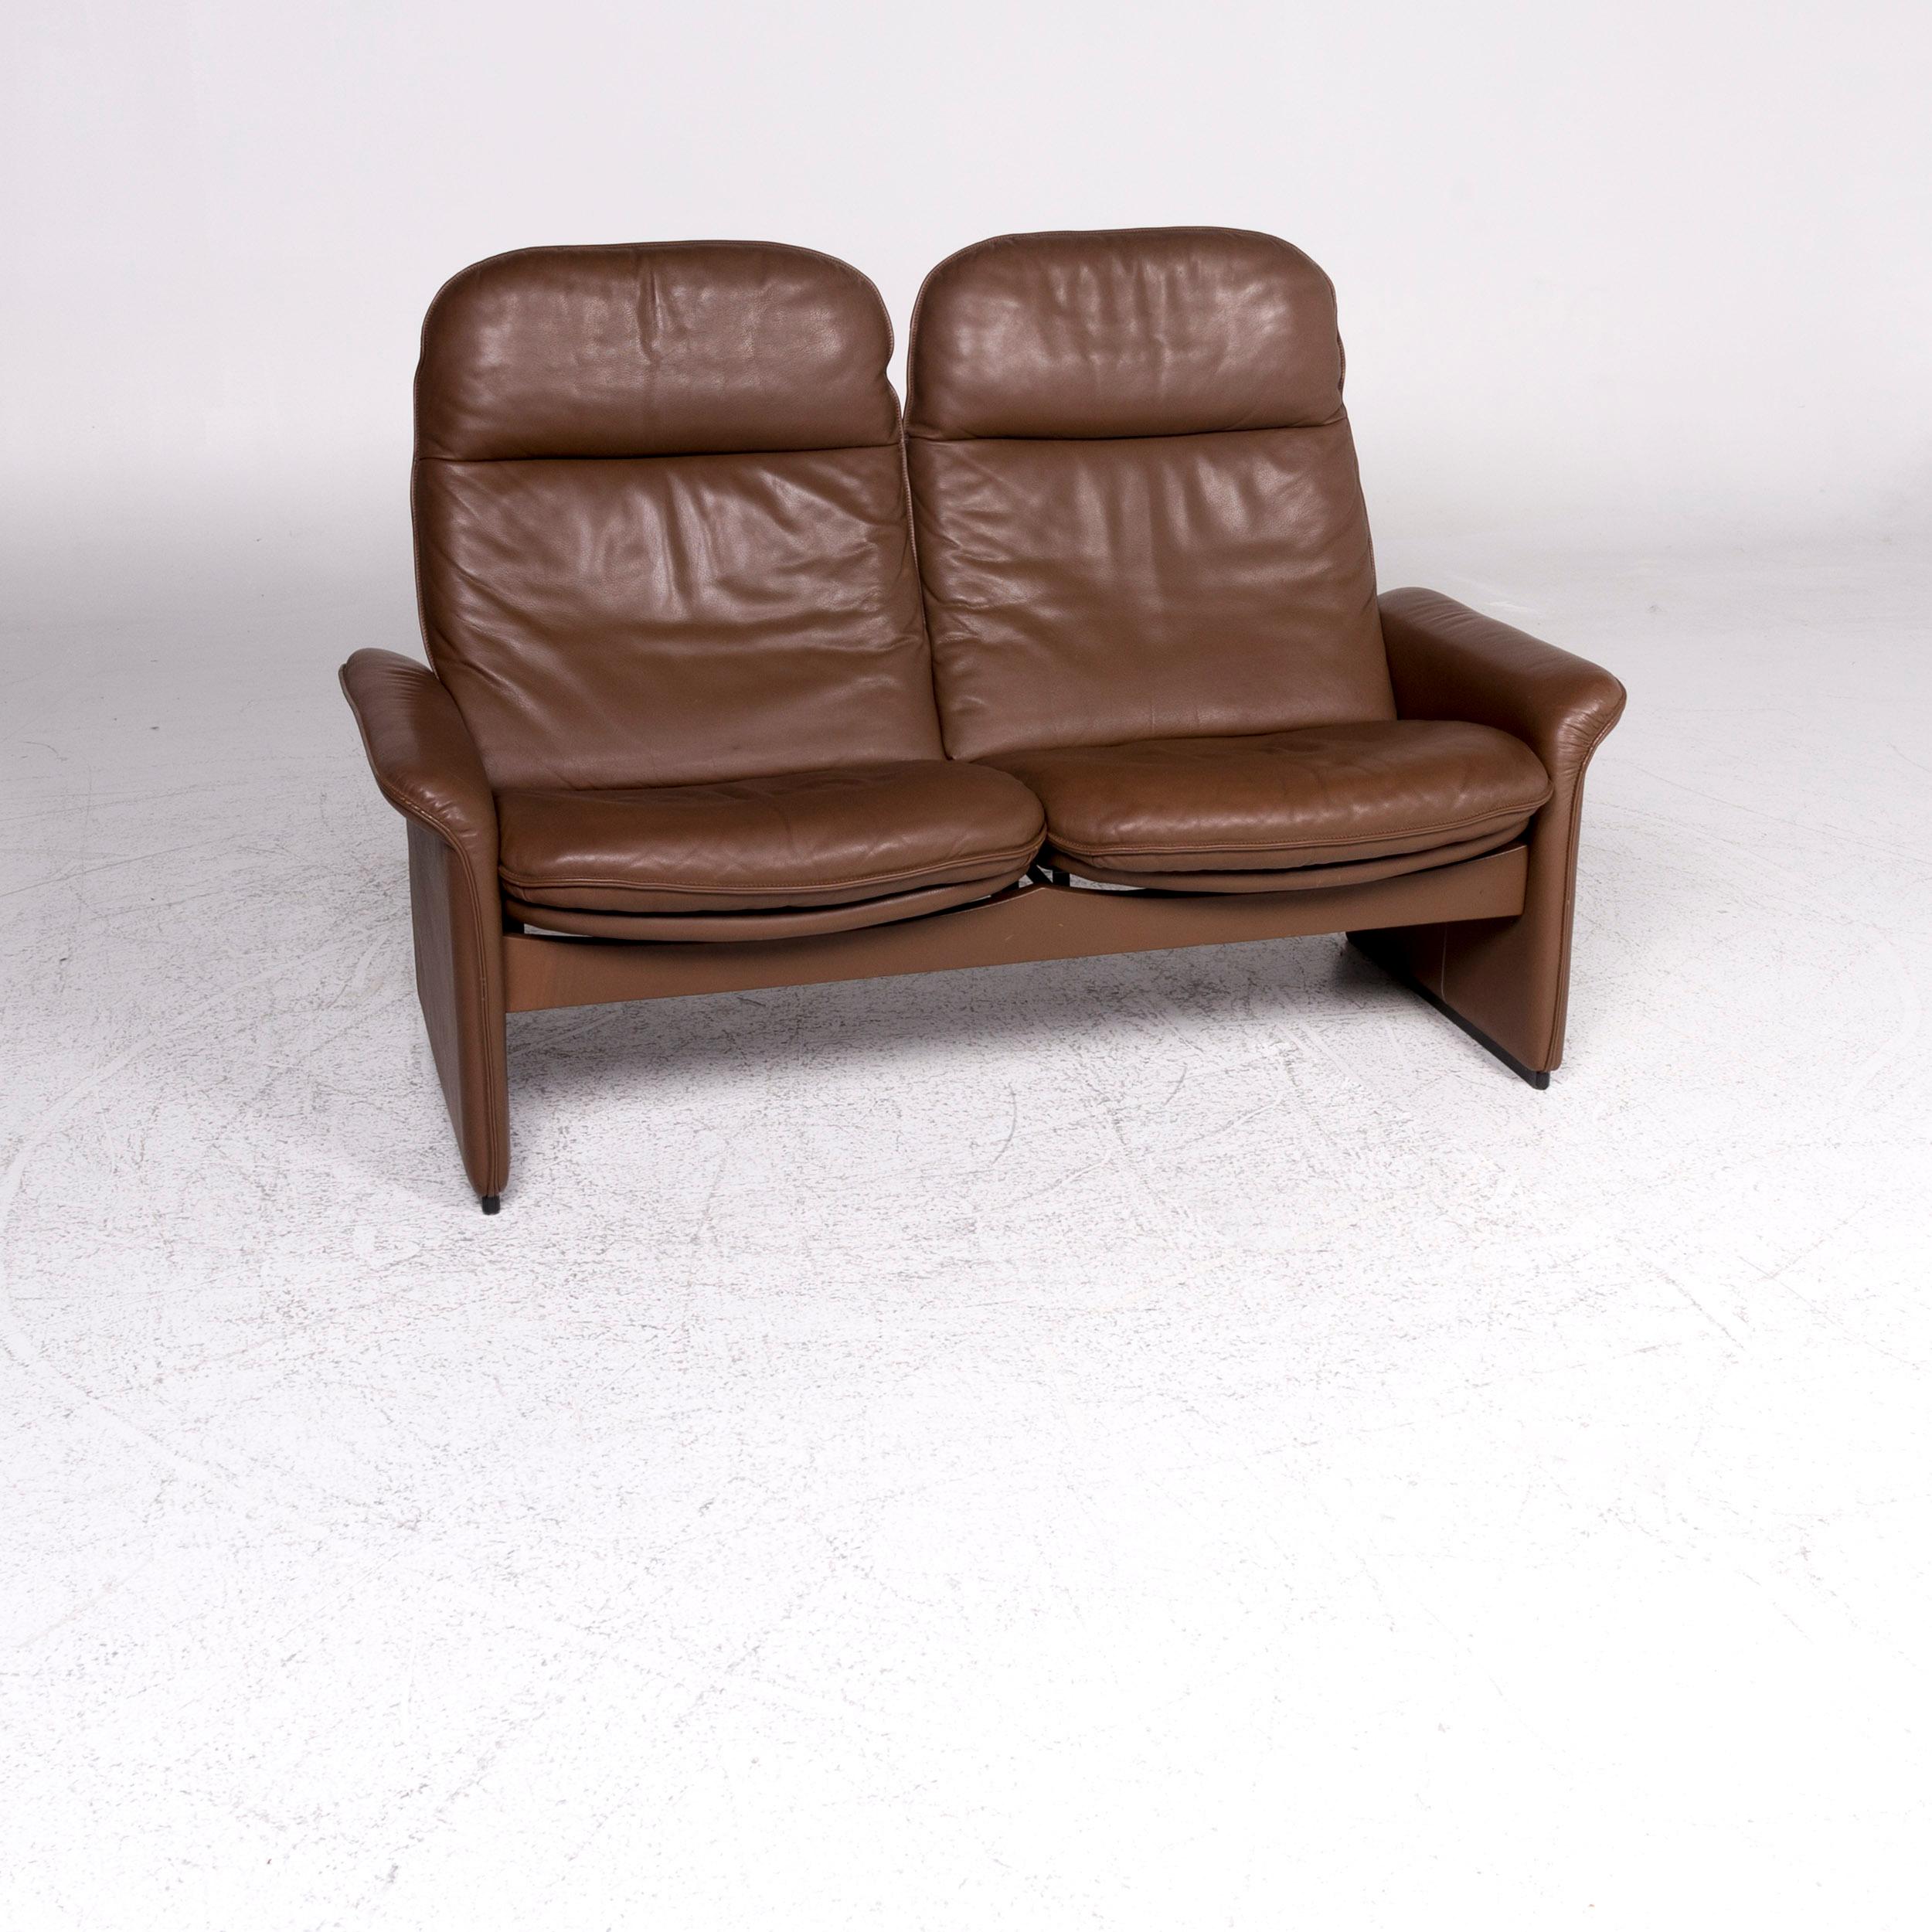 Modern De Sede DS 50 Leather Sofa Brown Two-Seat Couch